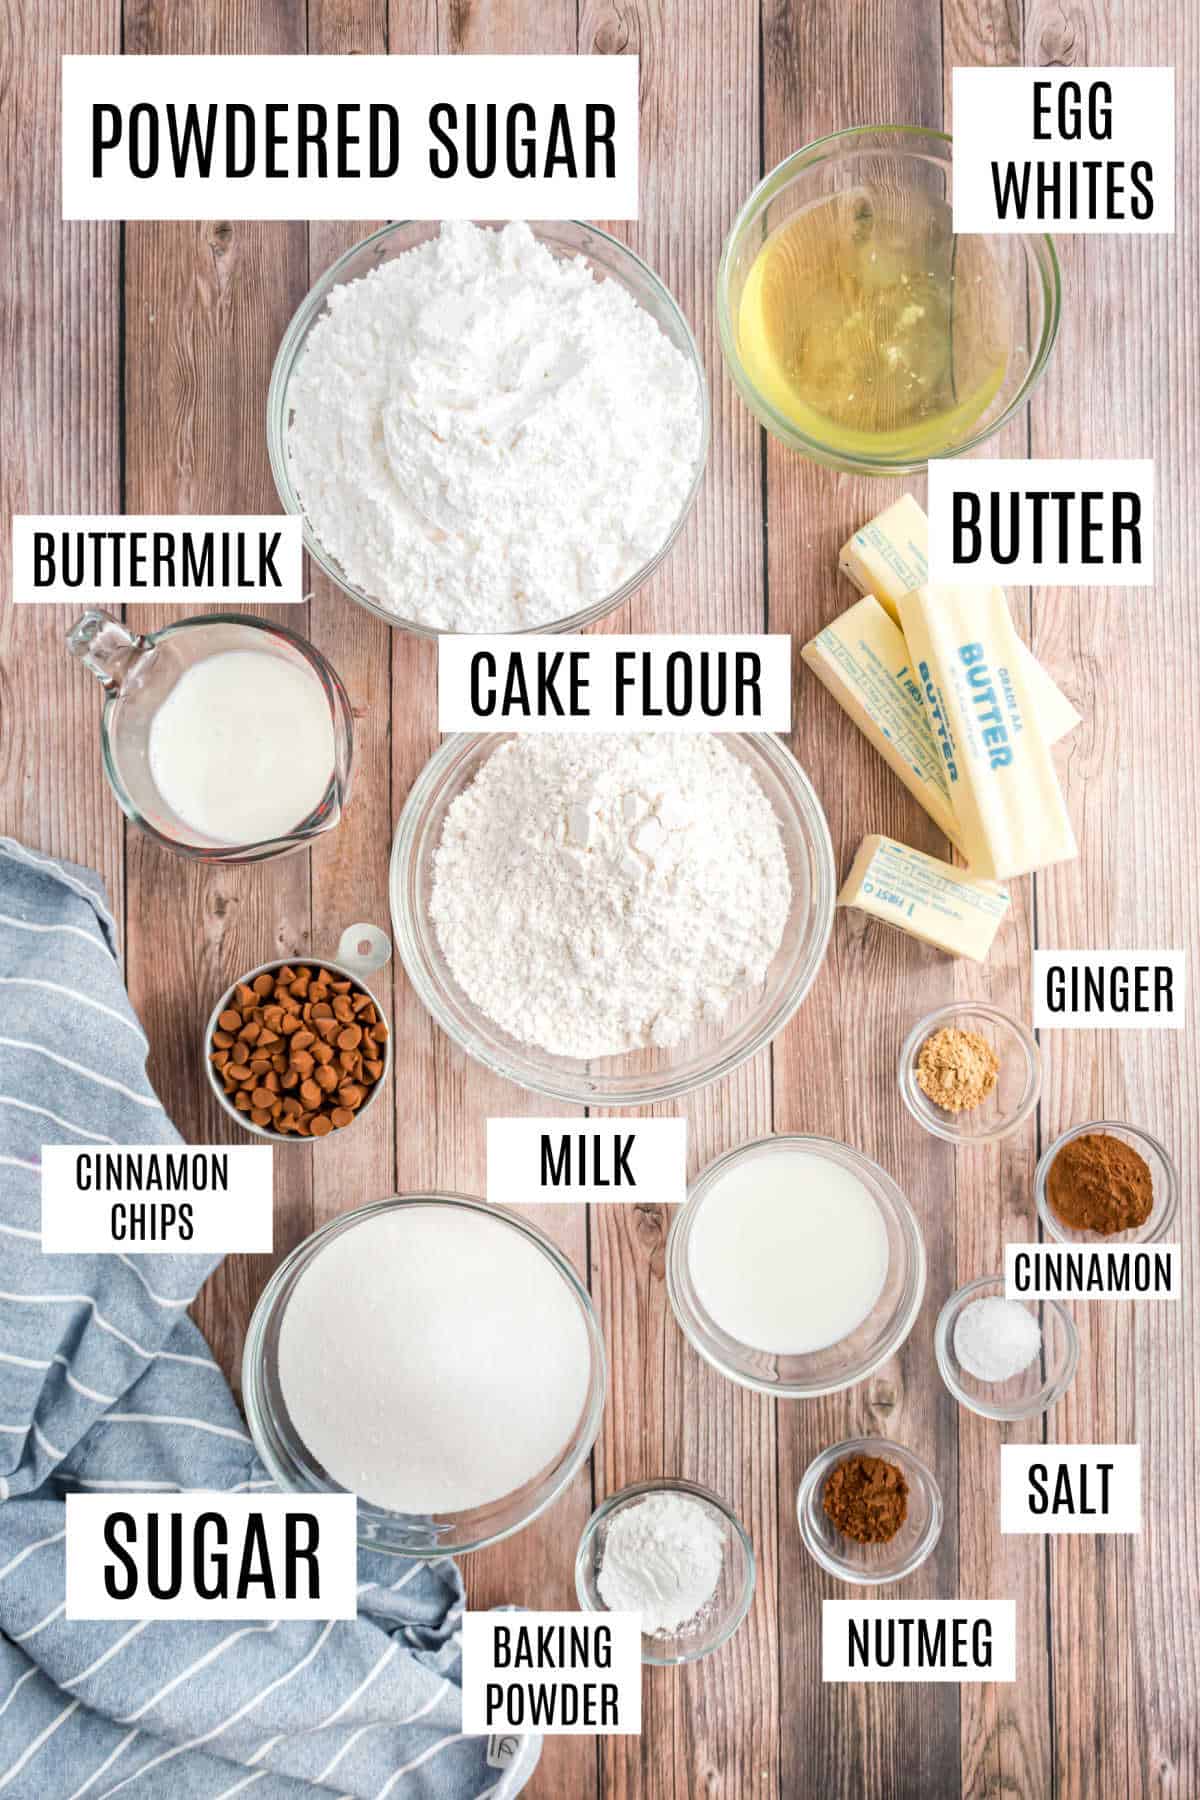 Ingredients needed to make cinnamon spice cake in a 13x9 baking dish.